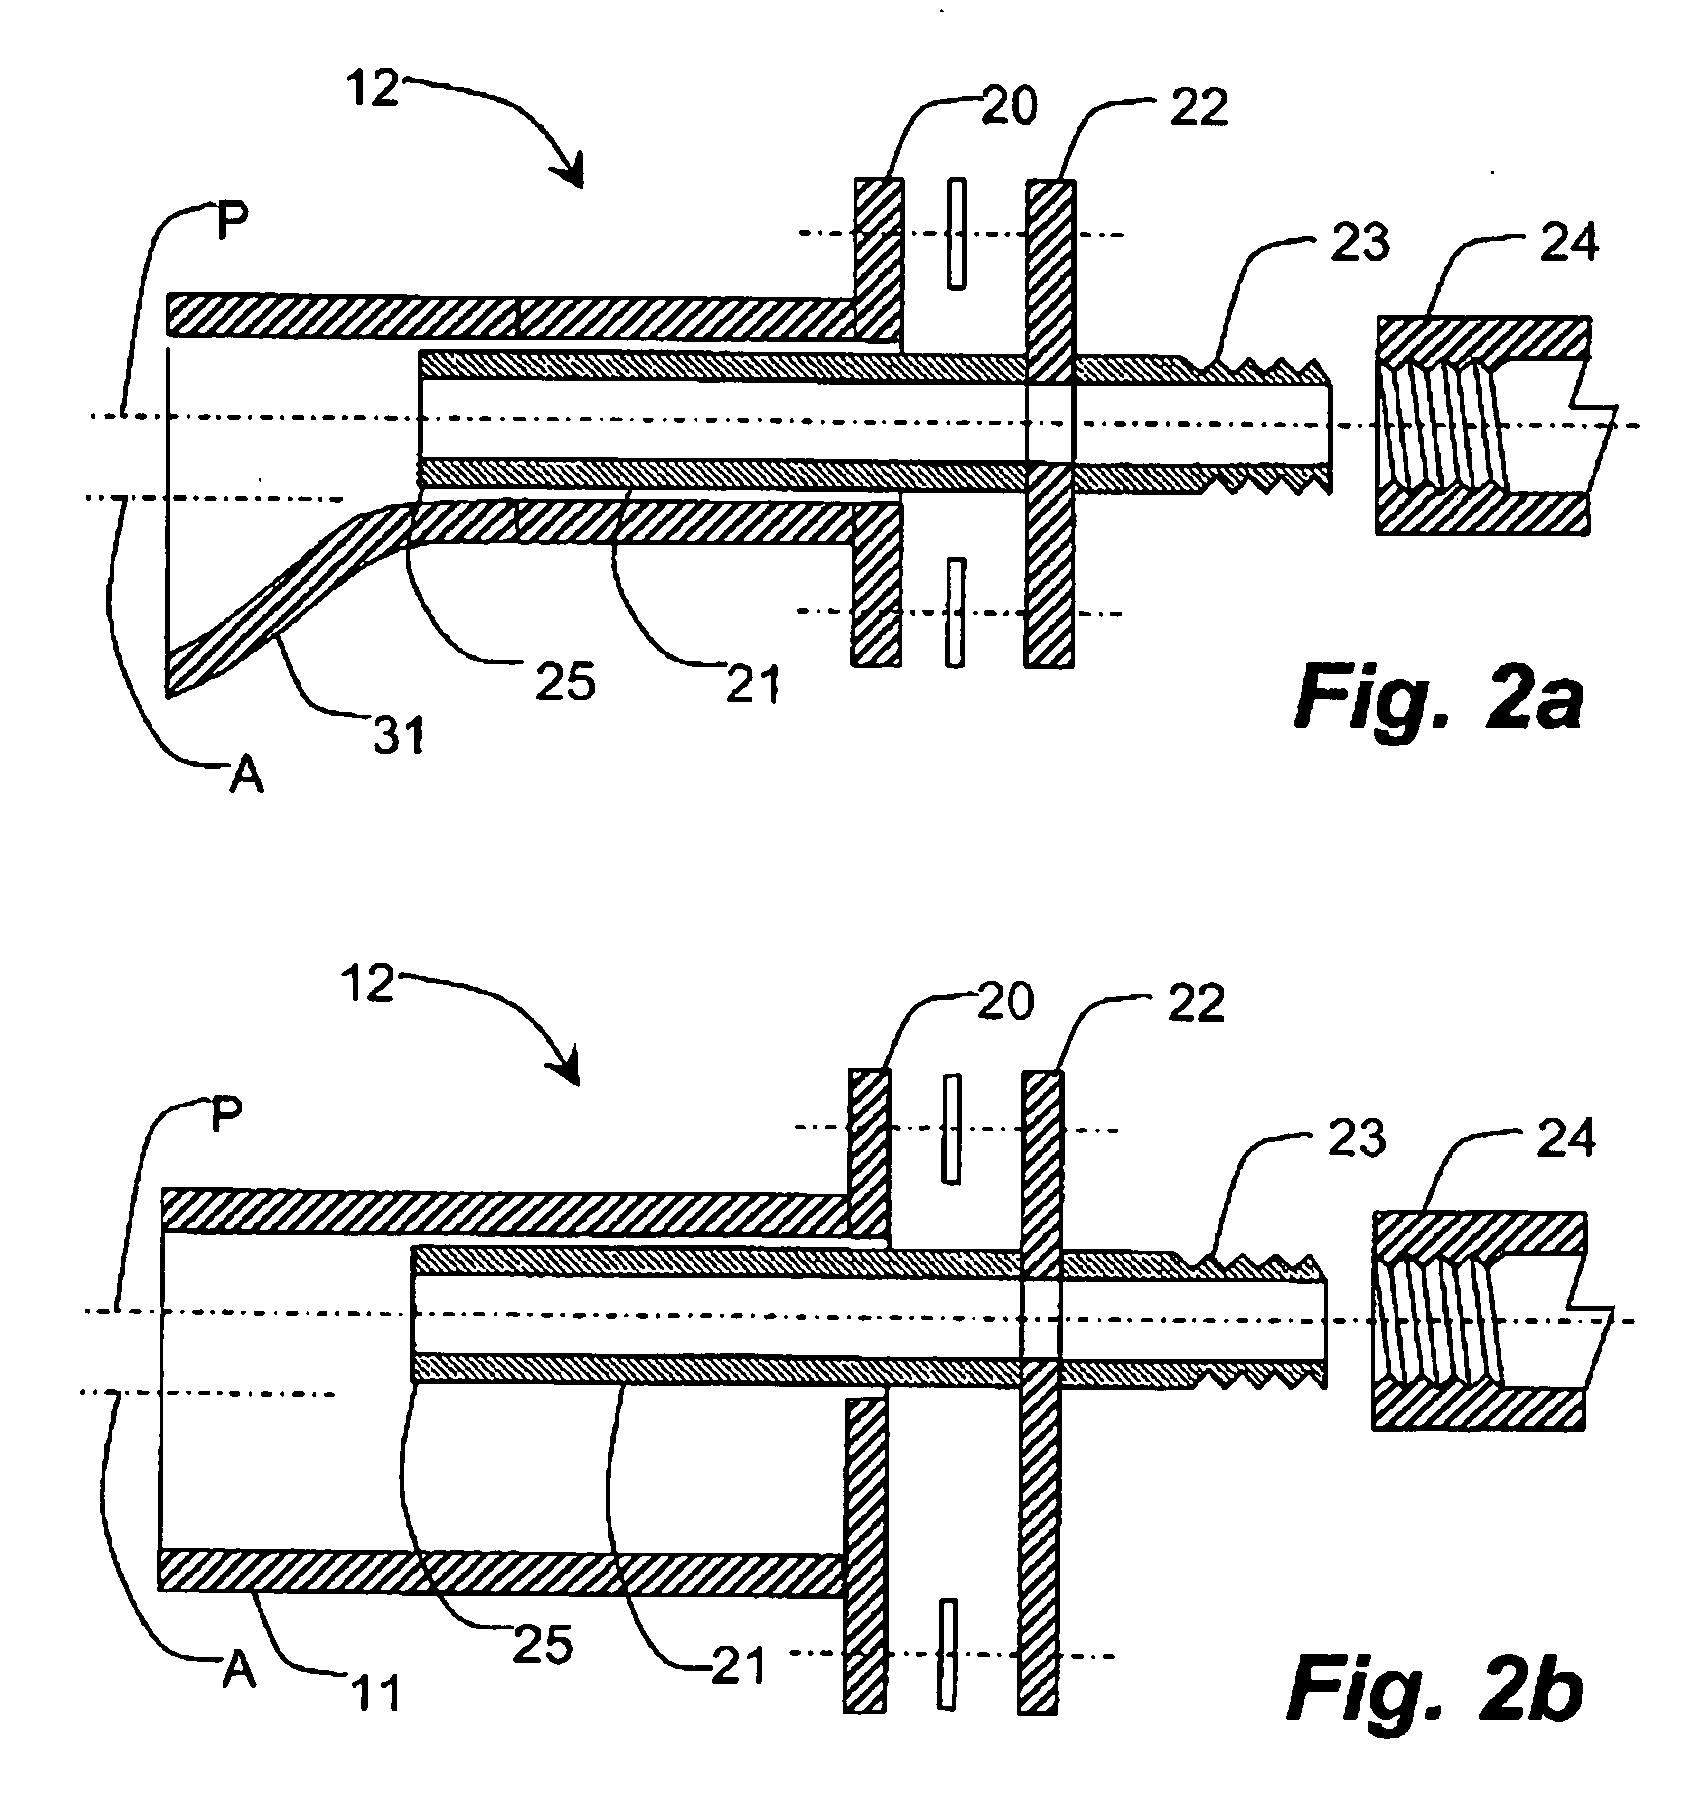 Desanding apparatus and system